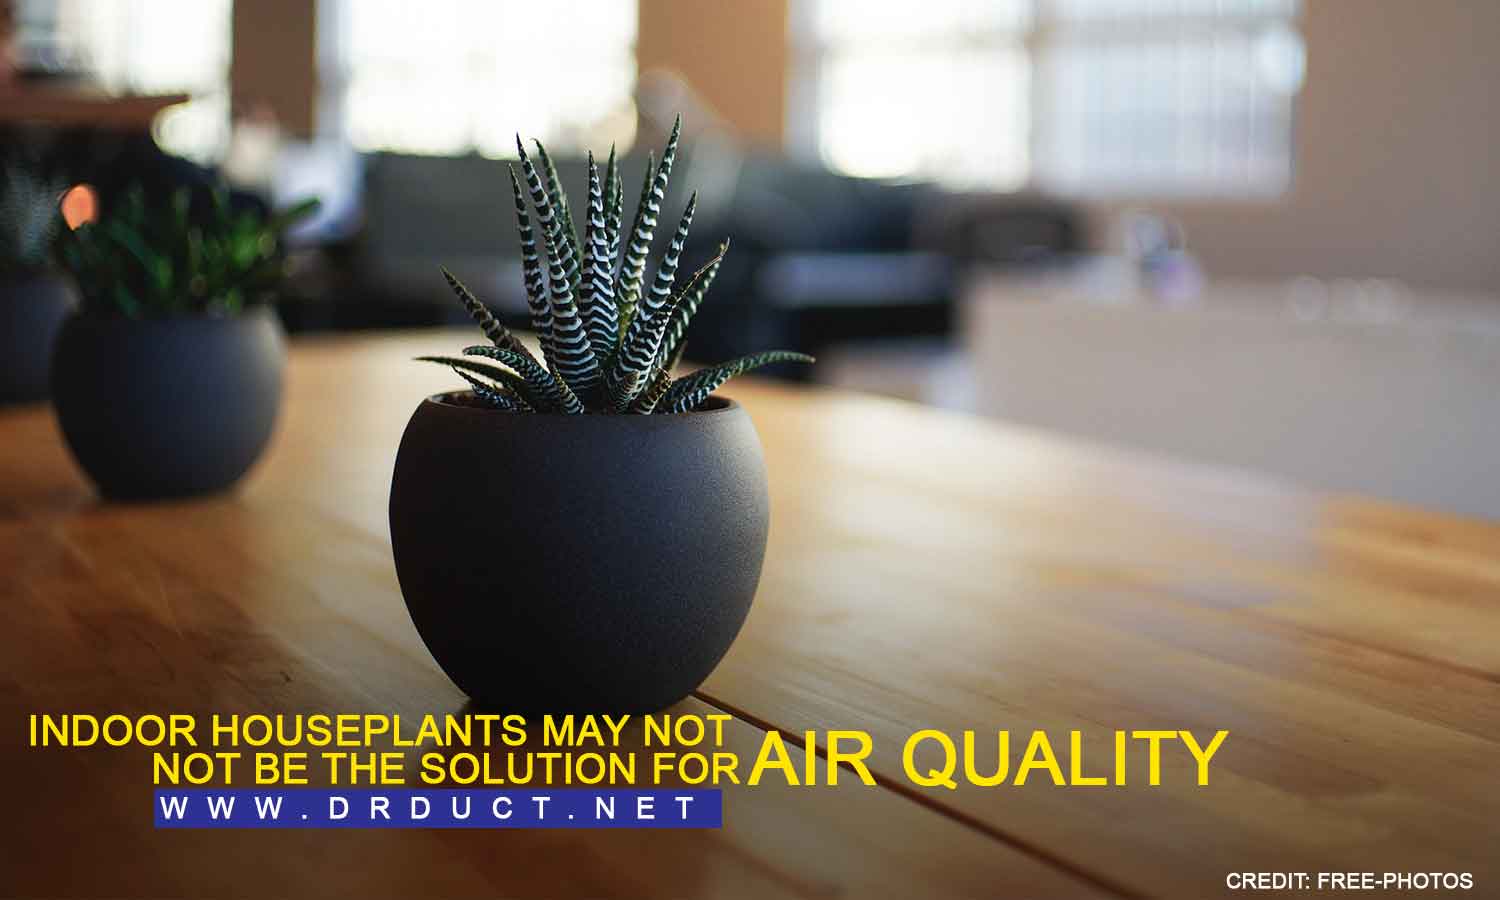 Indoor houseplants may not be the solution for air quality.